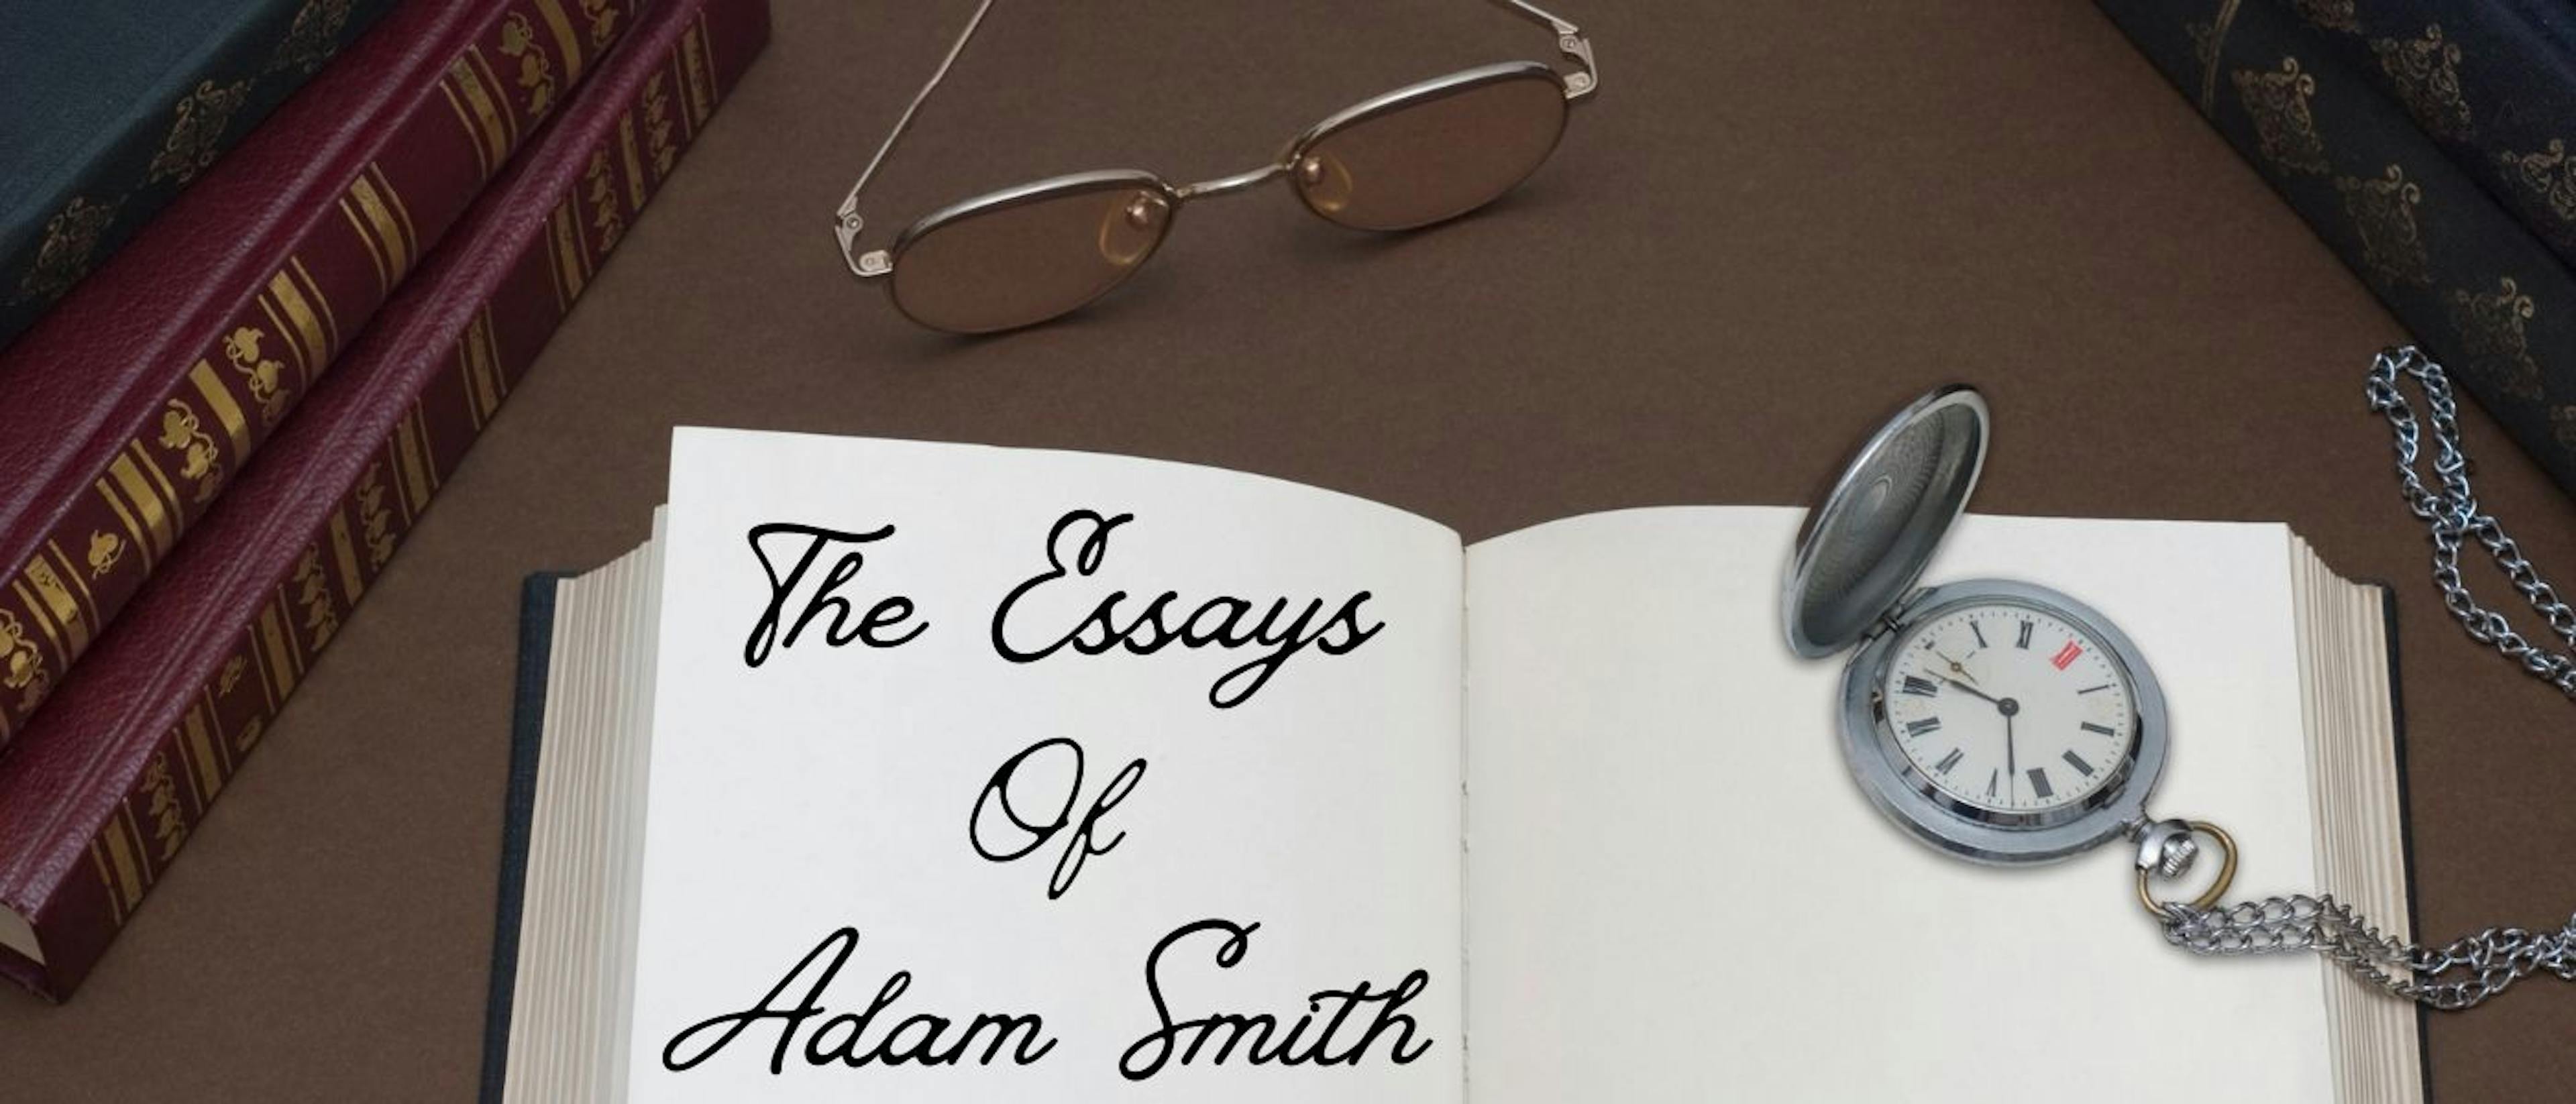 featured image - The Essays of Adam Smith: Part V, Chapter II